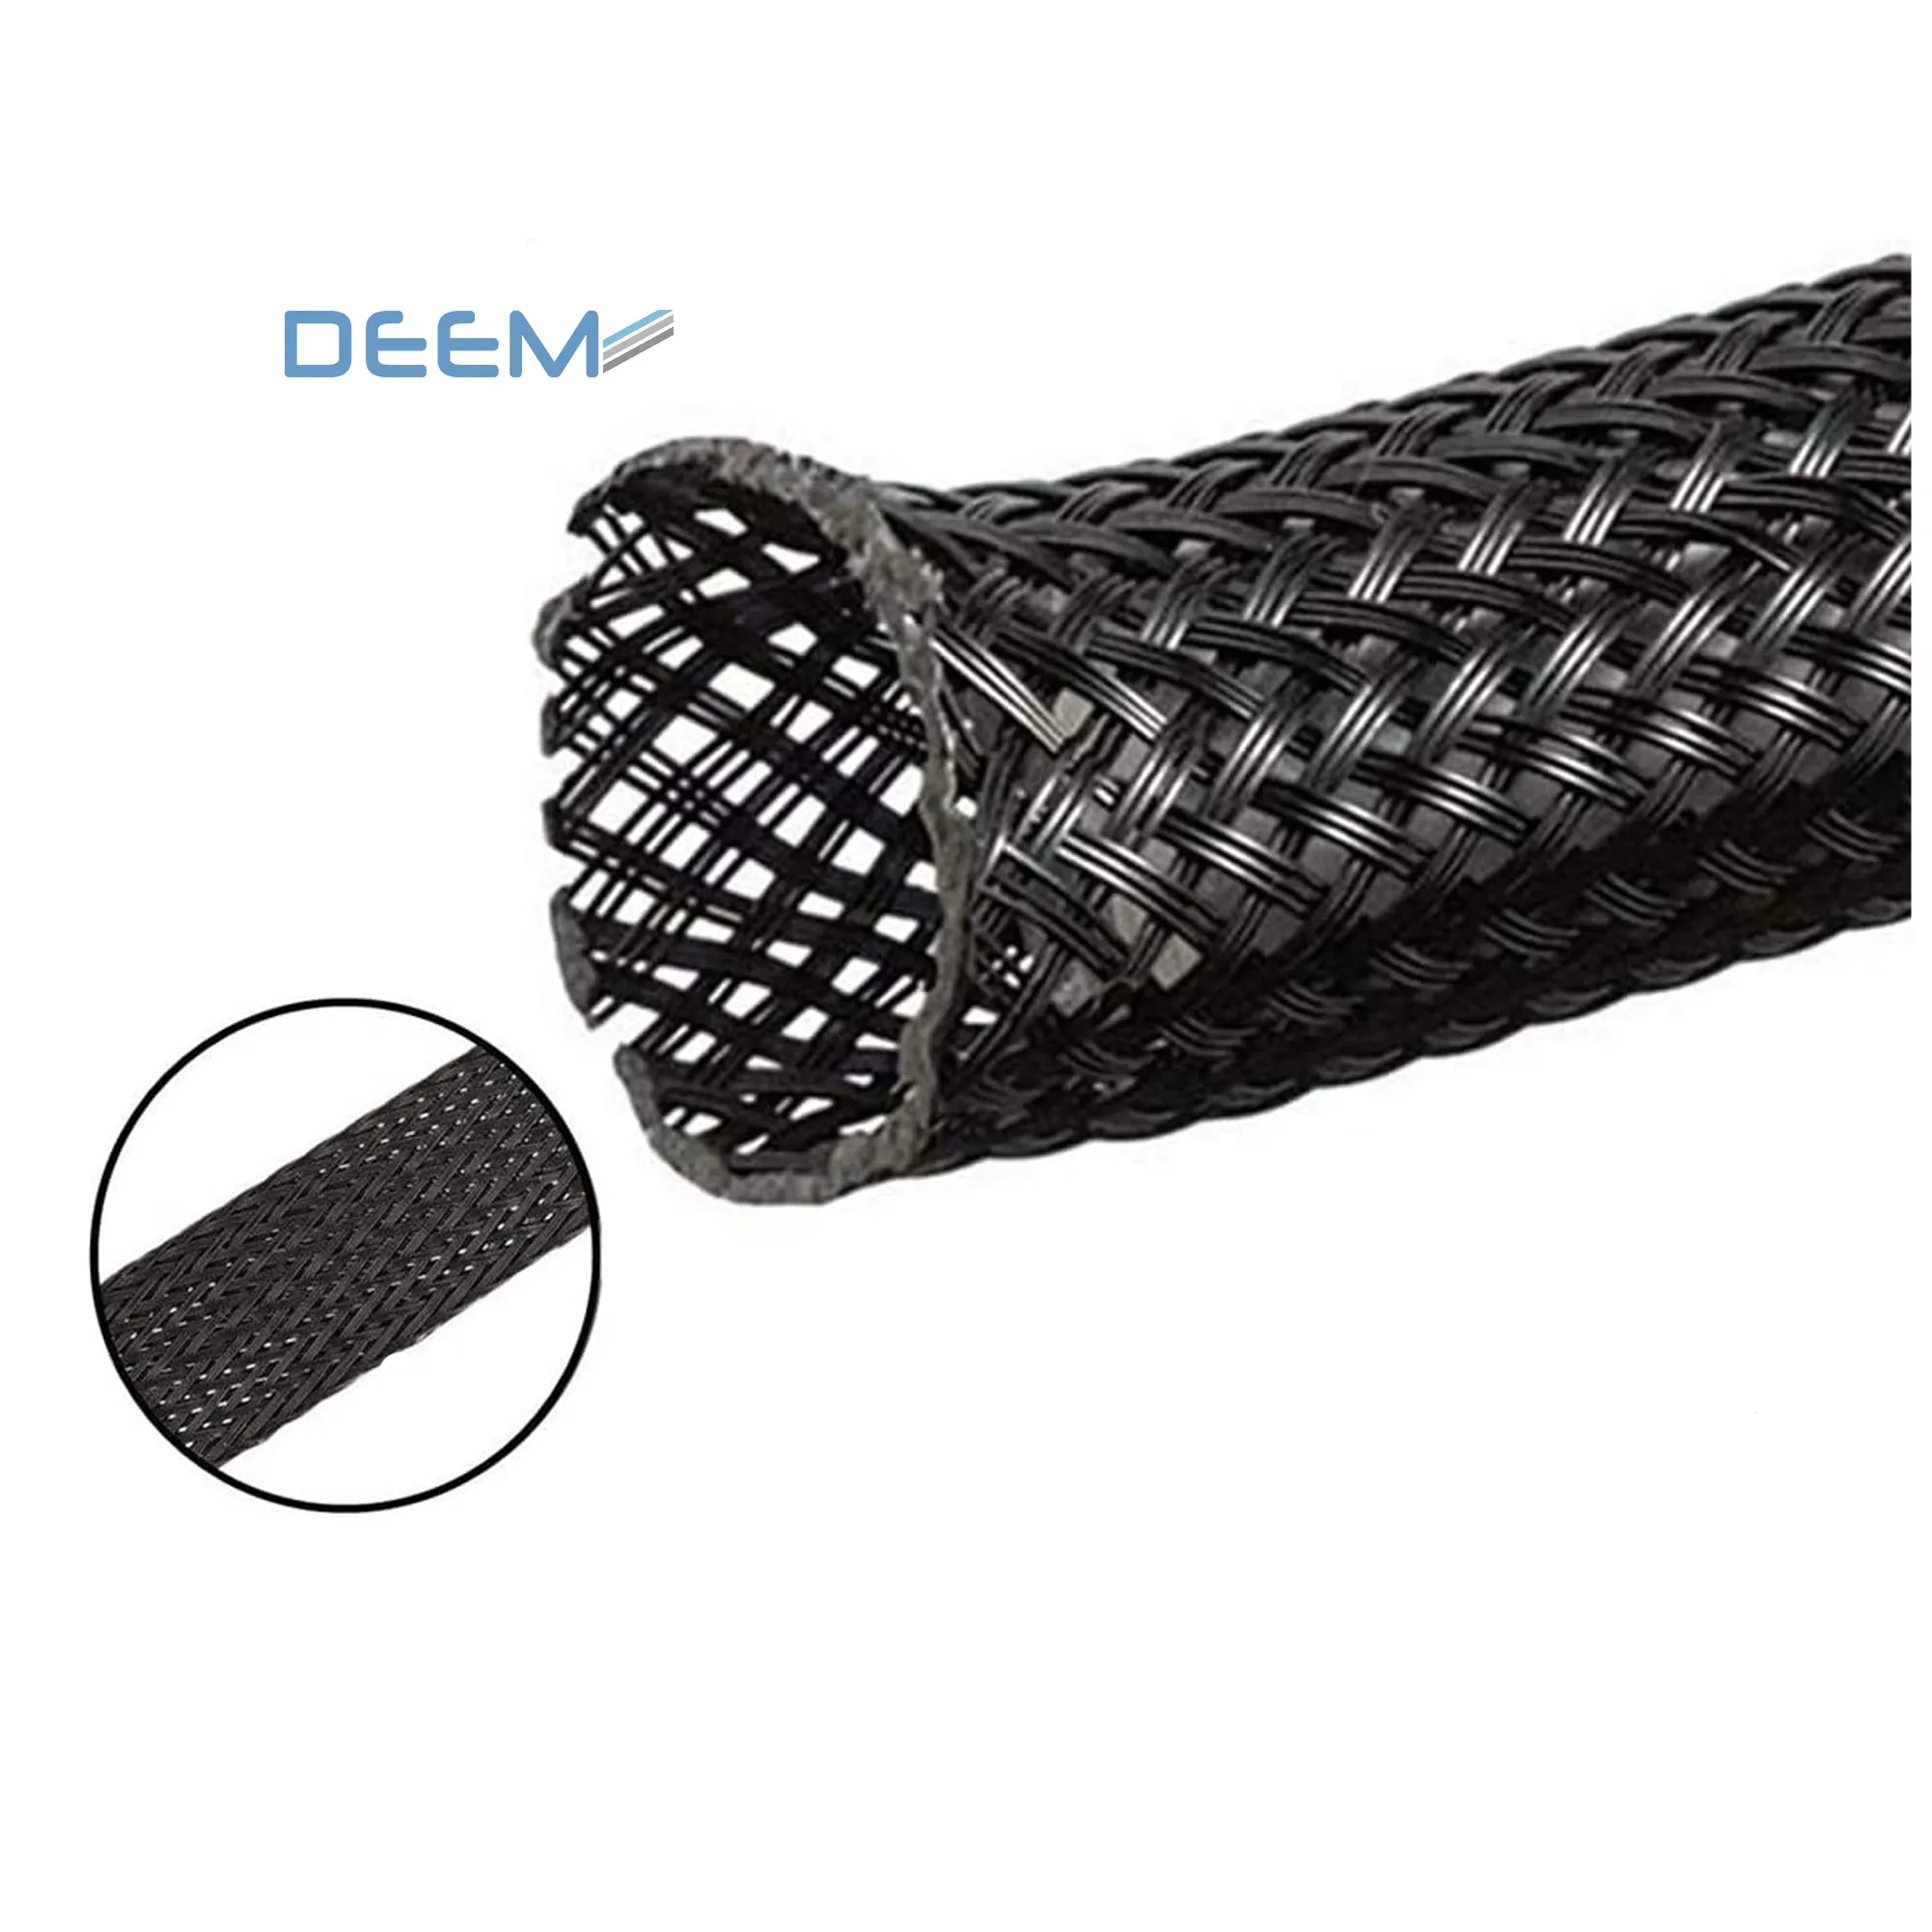 DEEM HOT Selling Adjustable braided expandable cable management sleeves